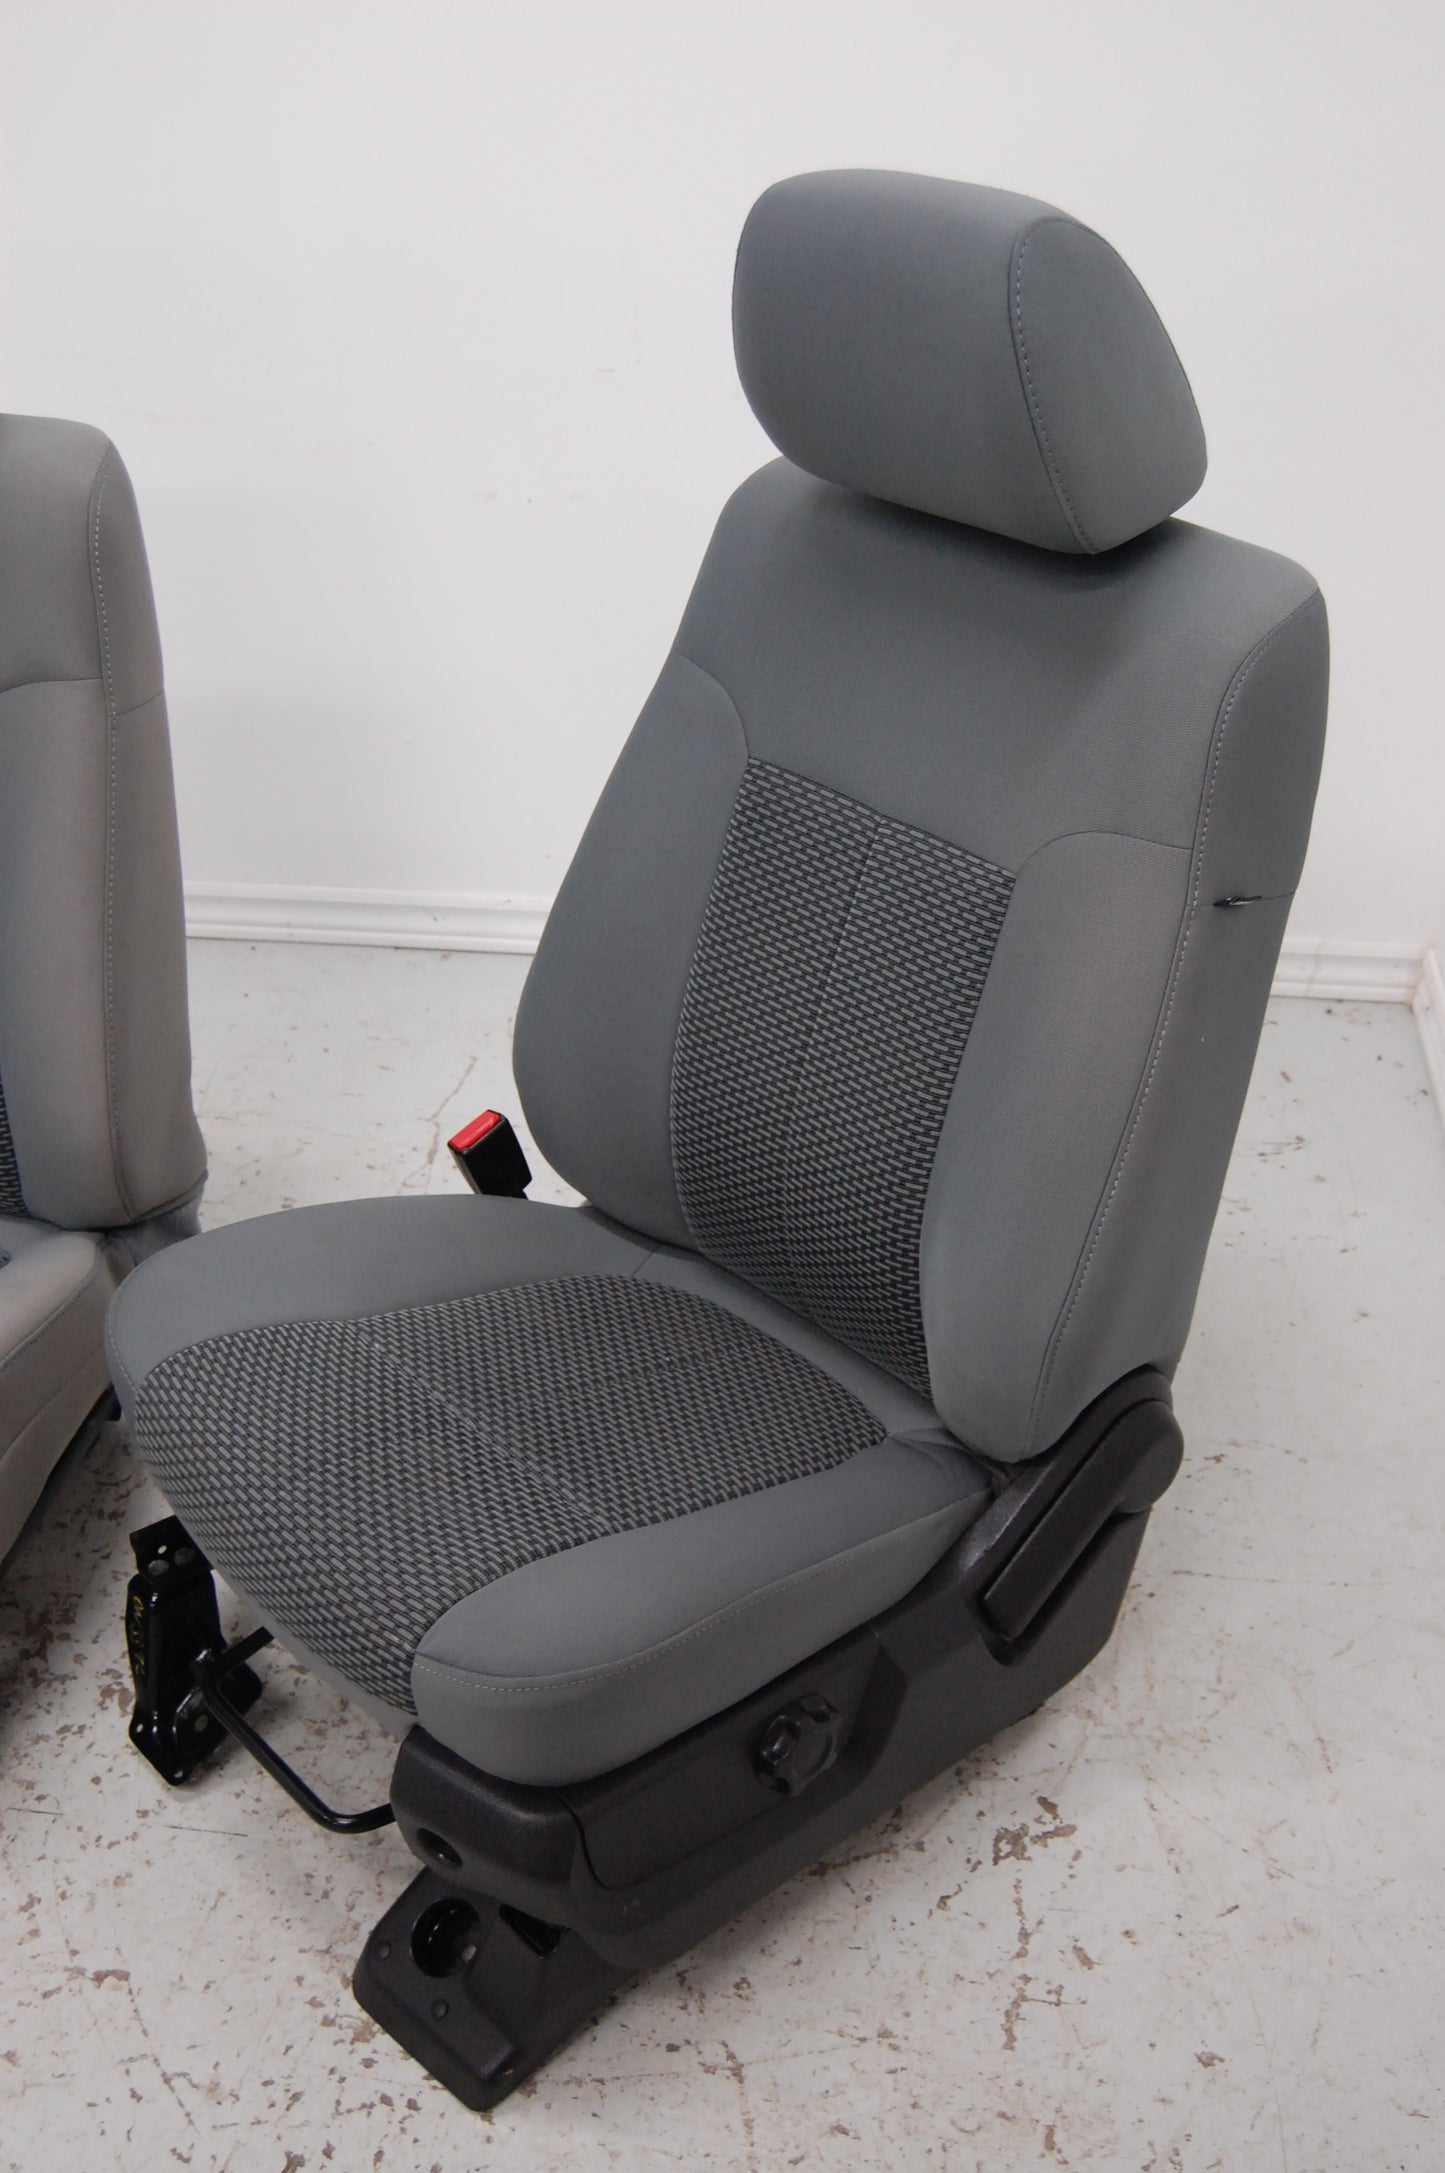 Ford Superduty Truck 2012 Grey Cloth Front Seats F250 F350 F450 F550 with Console